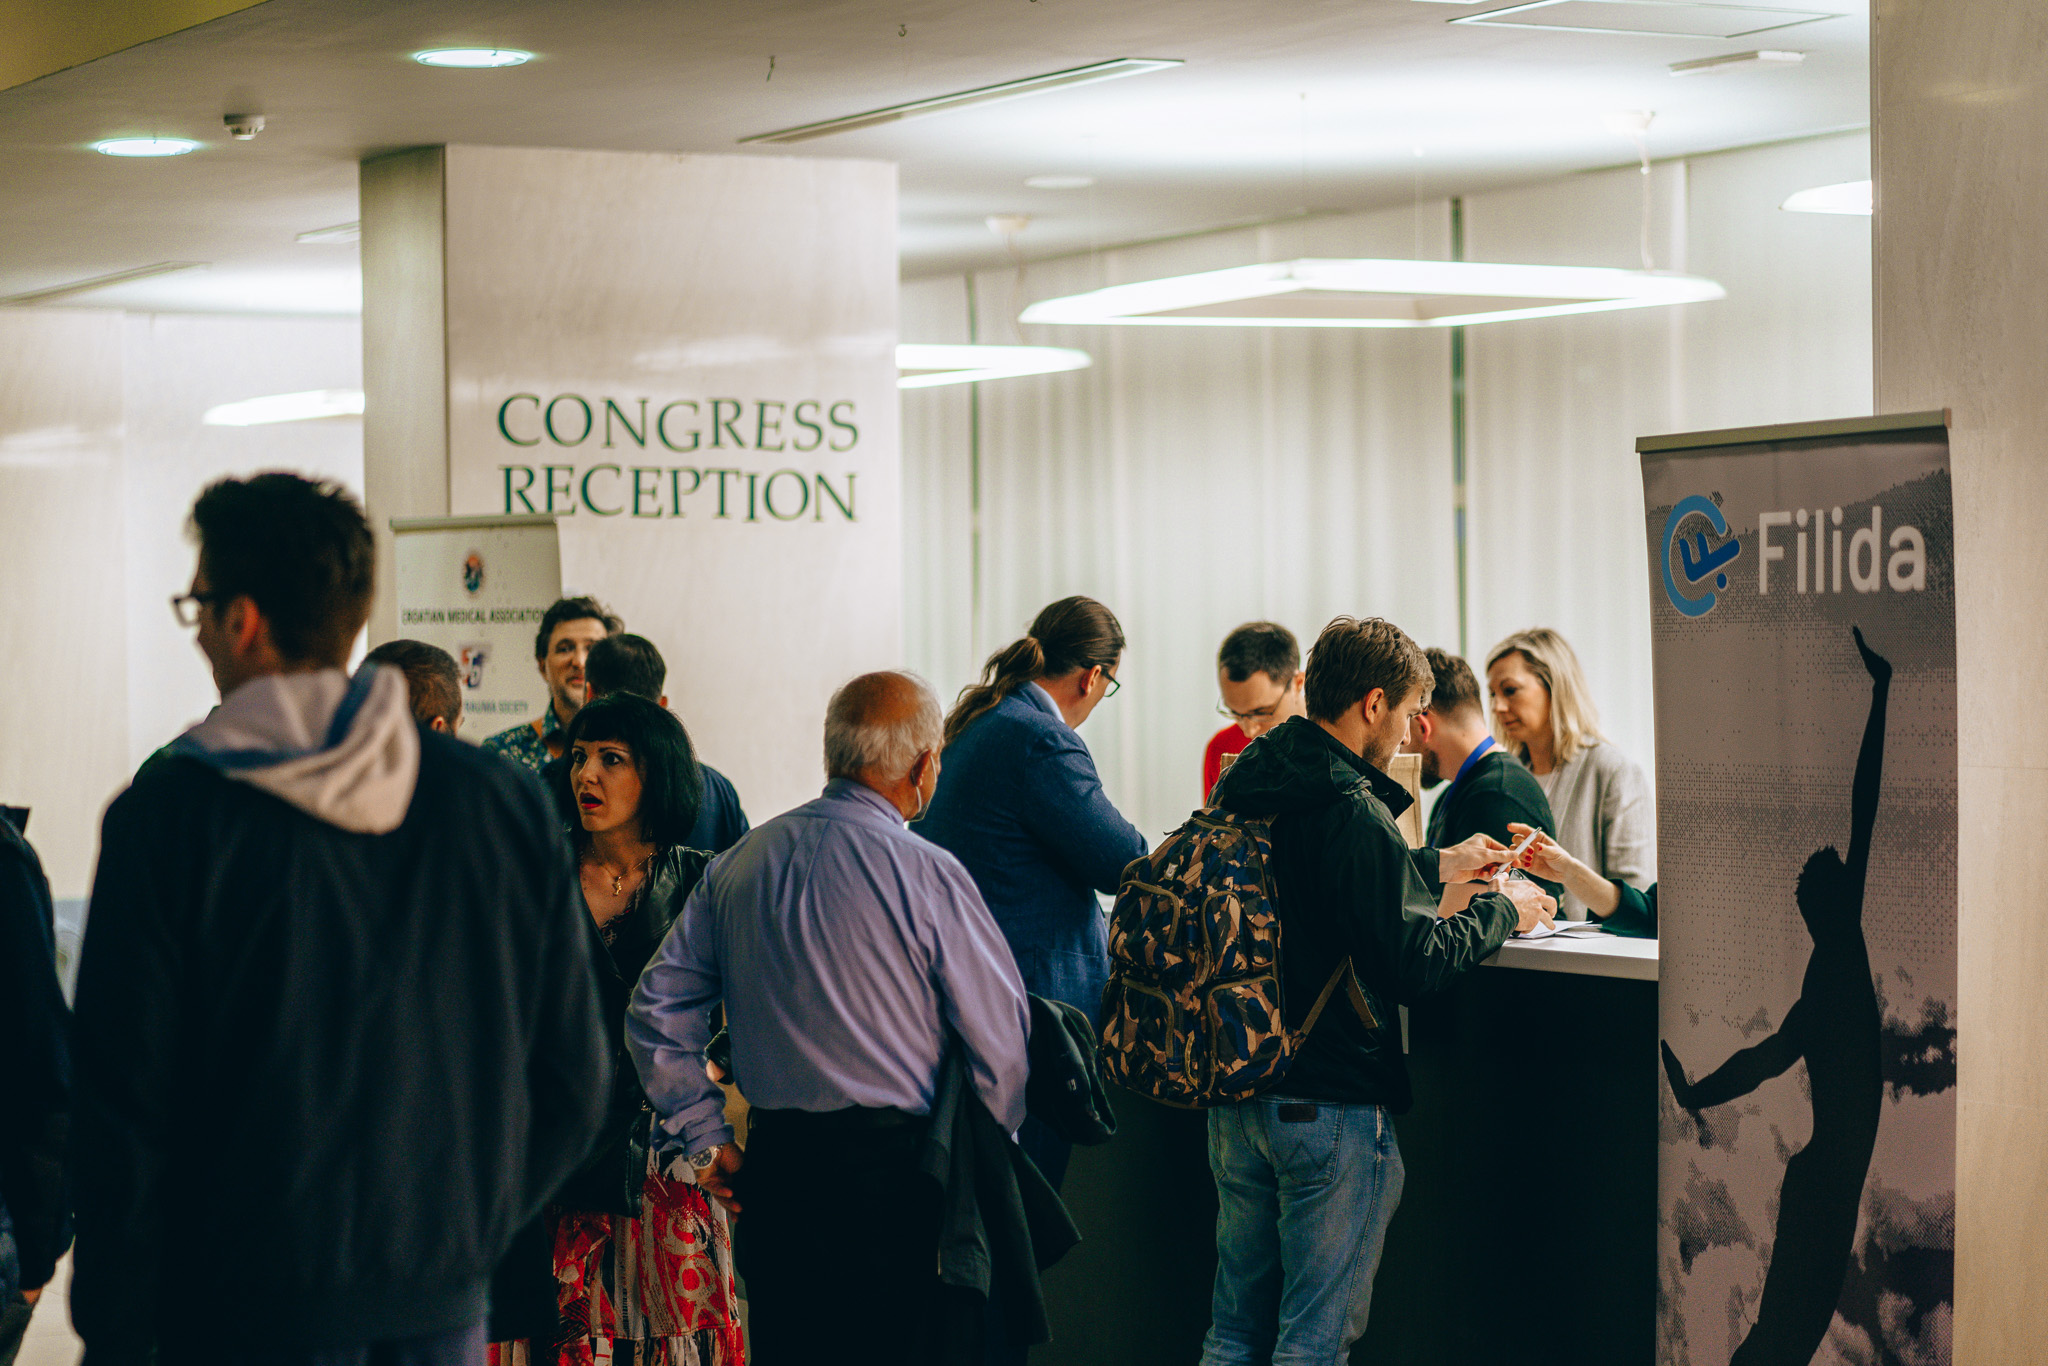 PHOTOS: Registration – 6th CTS Congress